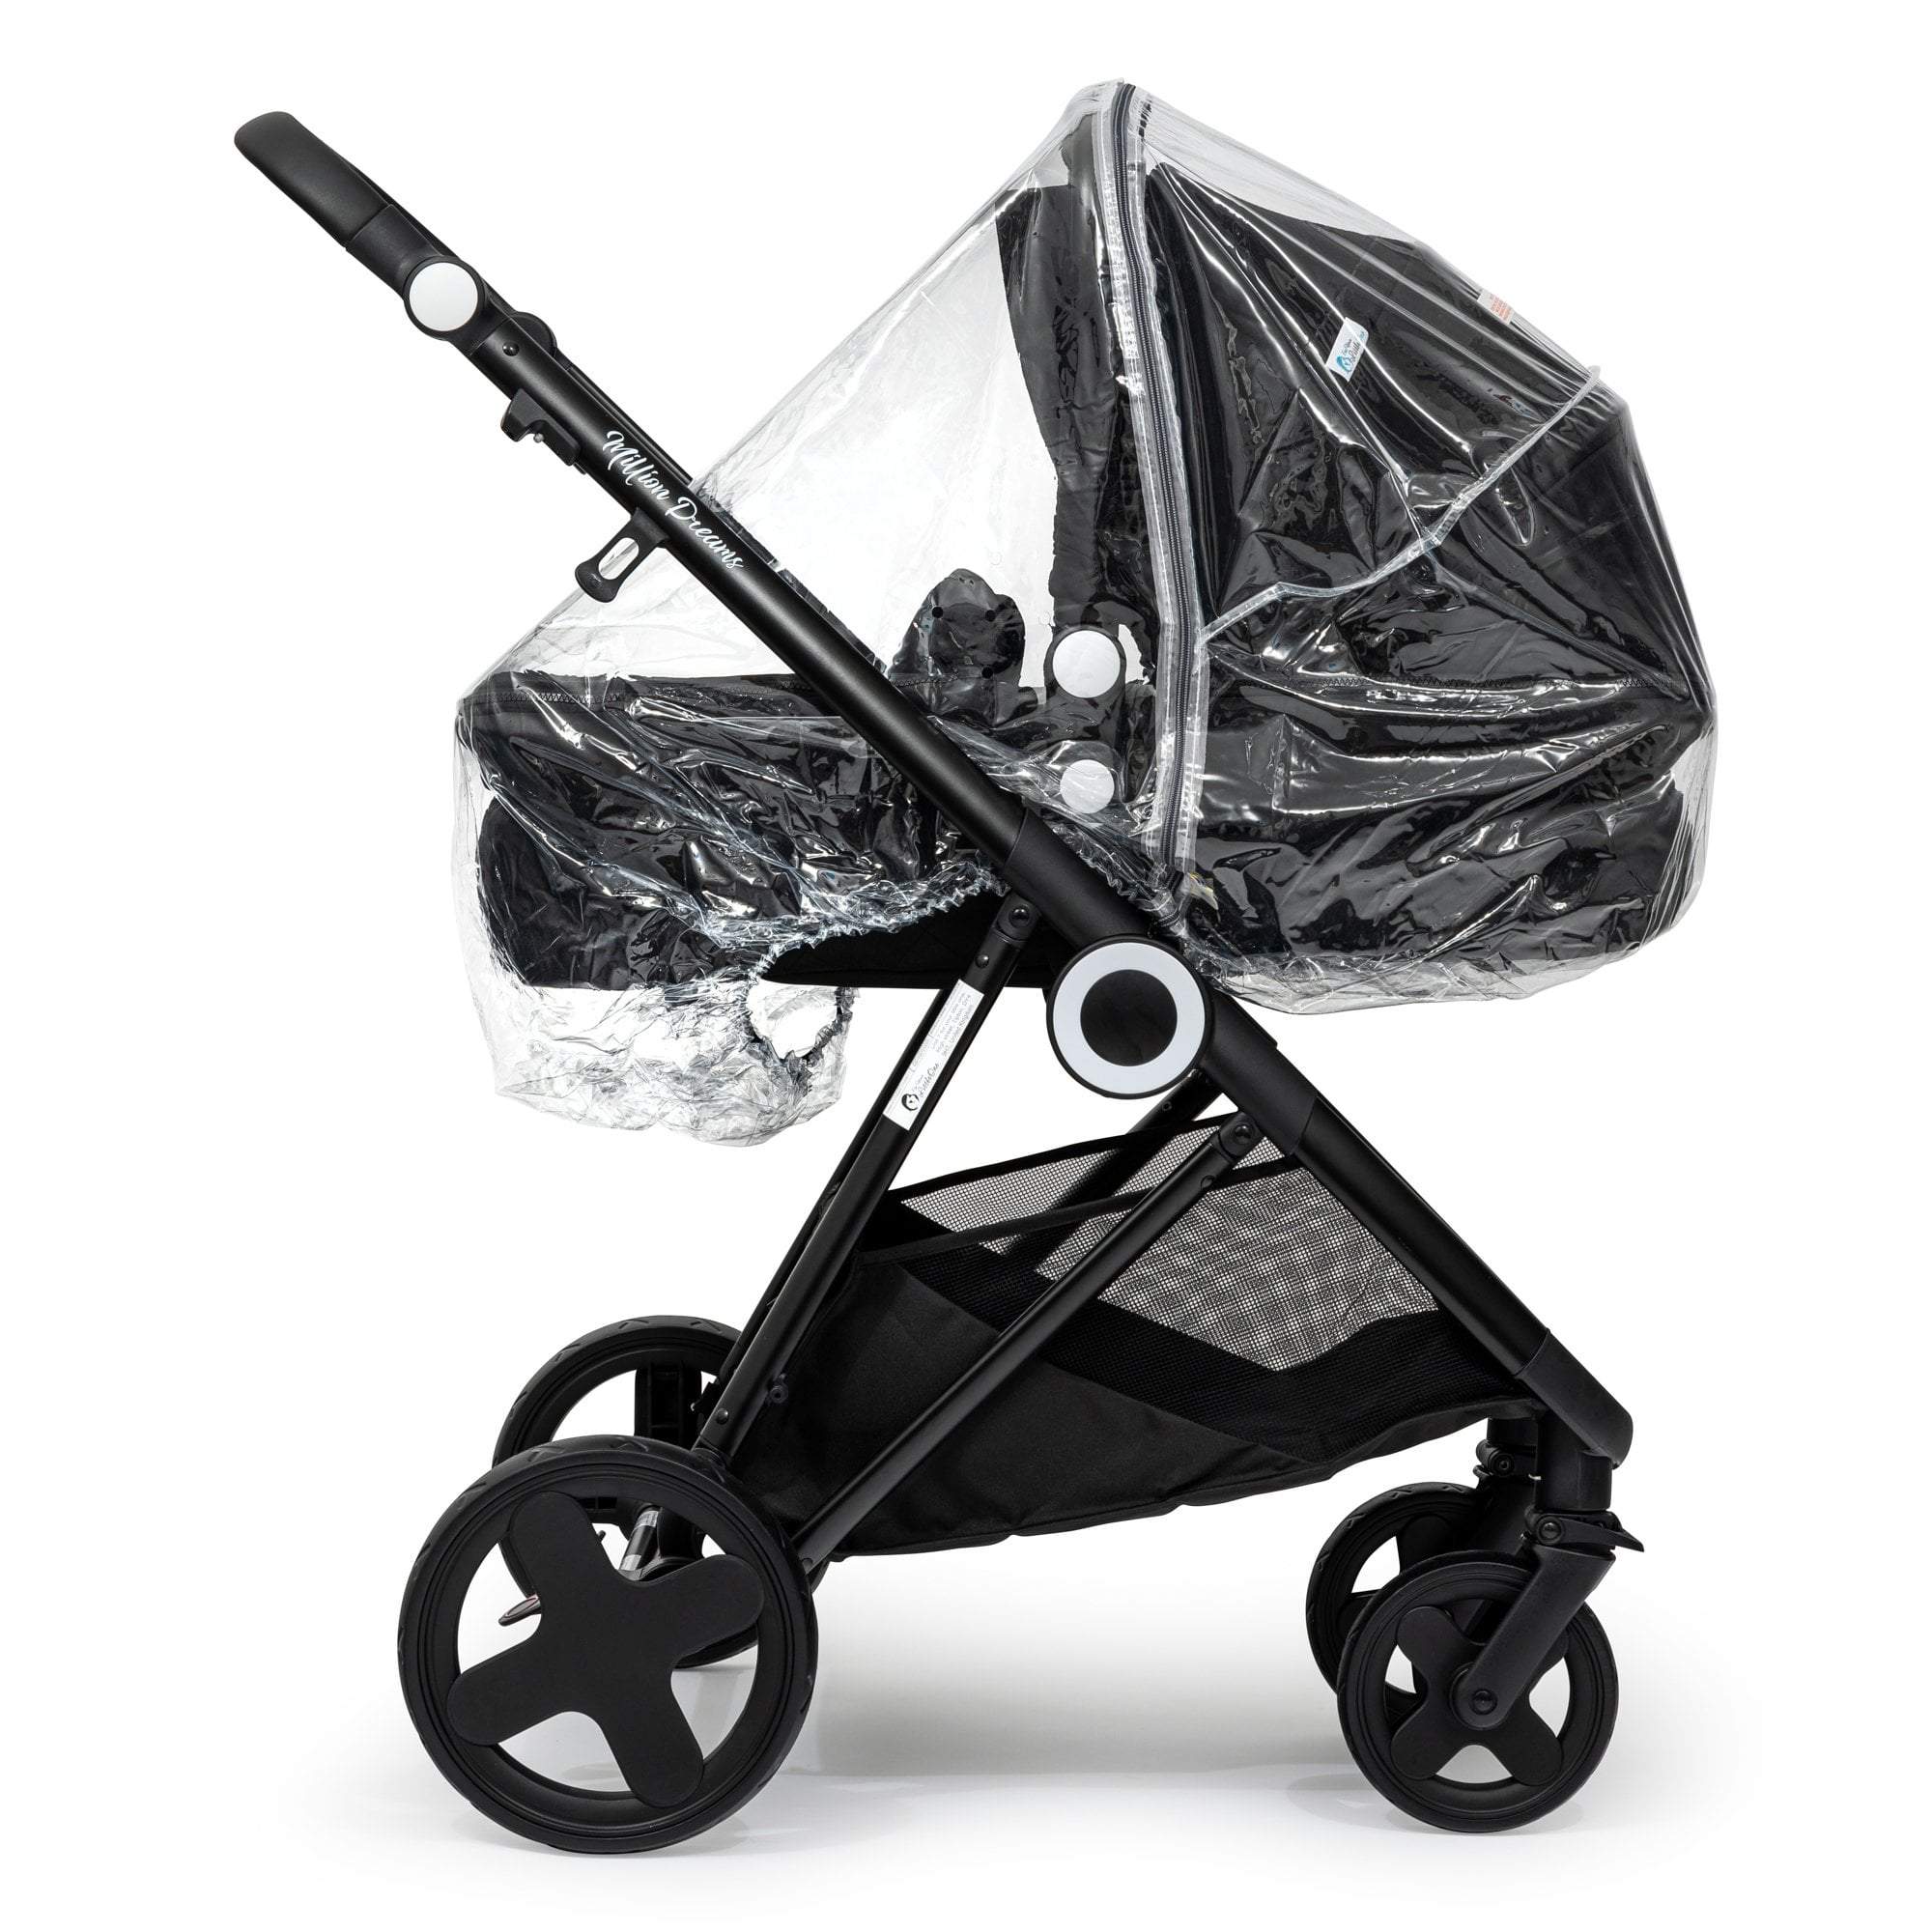 Carrycot Raincover Compatible With Baby Jogger - Fits All Models - For Your Little One